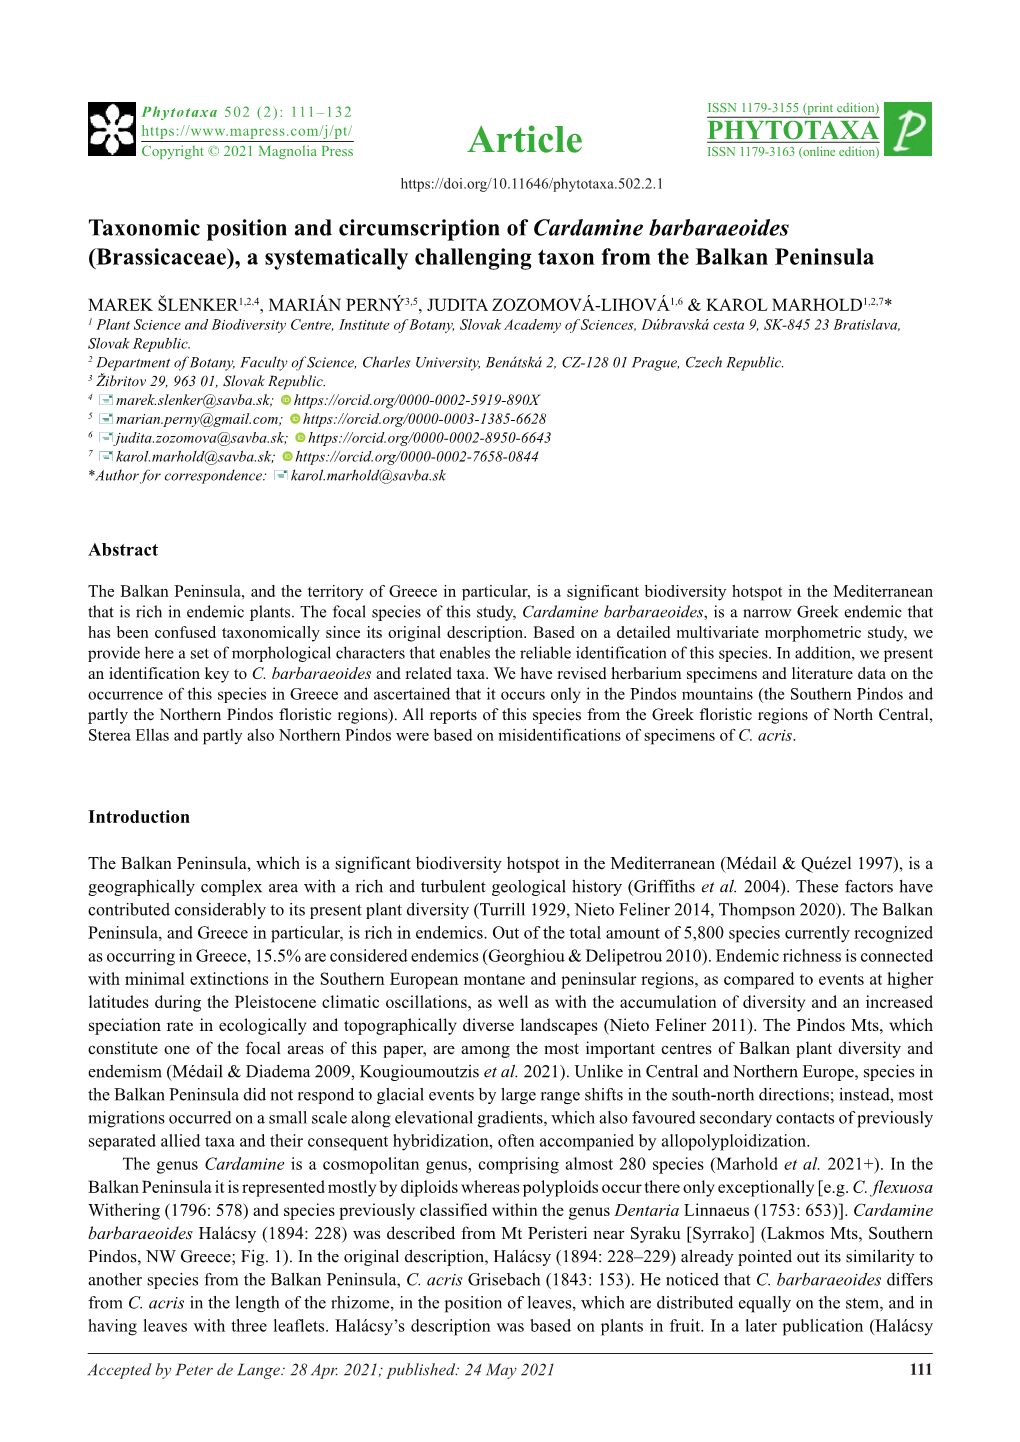 Taxonomic Position and Circumscription of Cardamine Barbaraeoides (Brassicaceae), a Systematically Challenging Taxon from the Balkan Peninsula